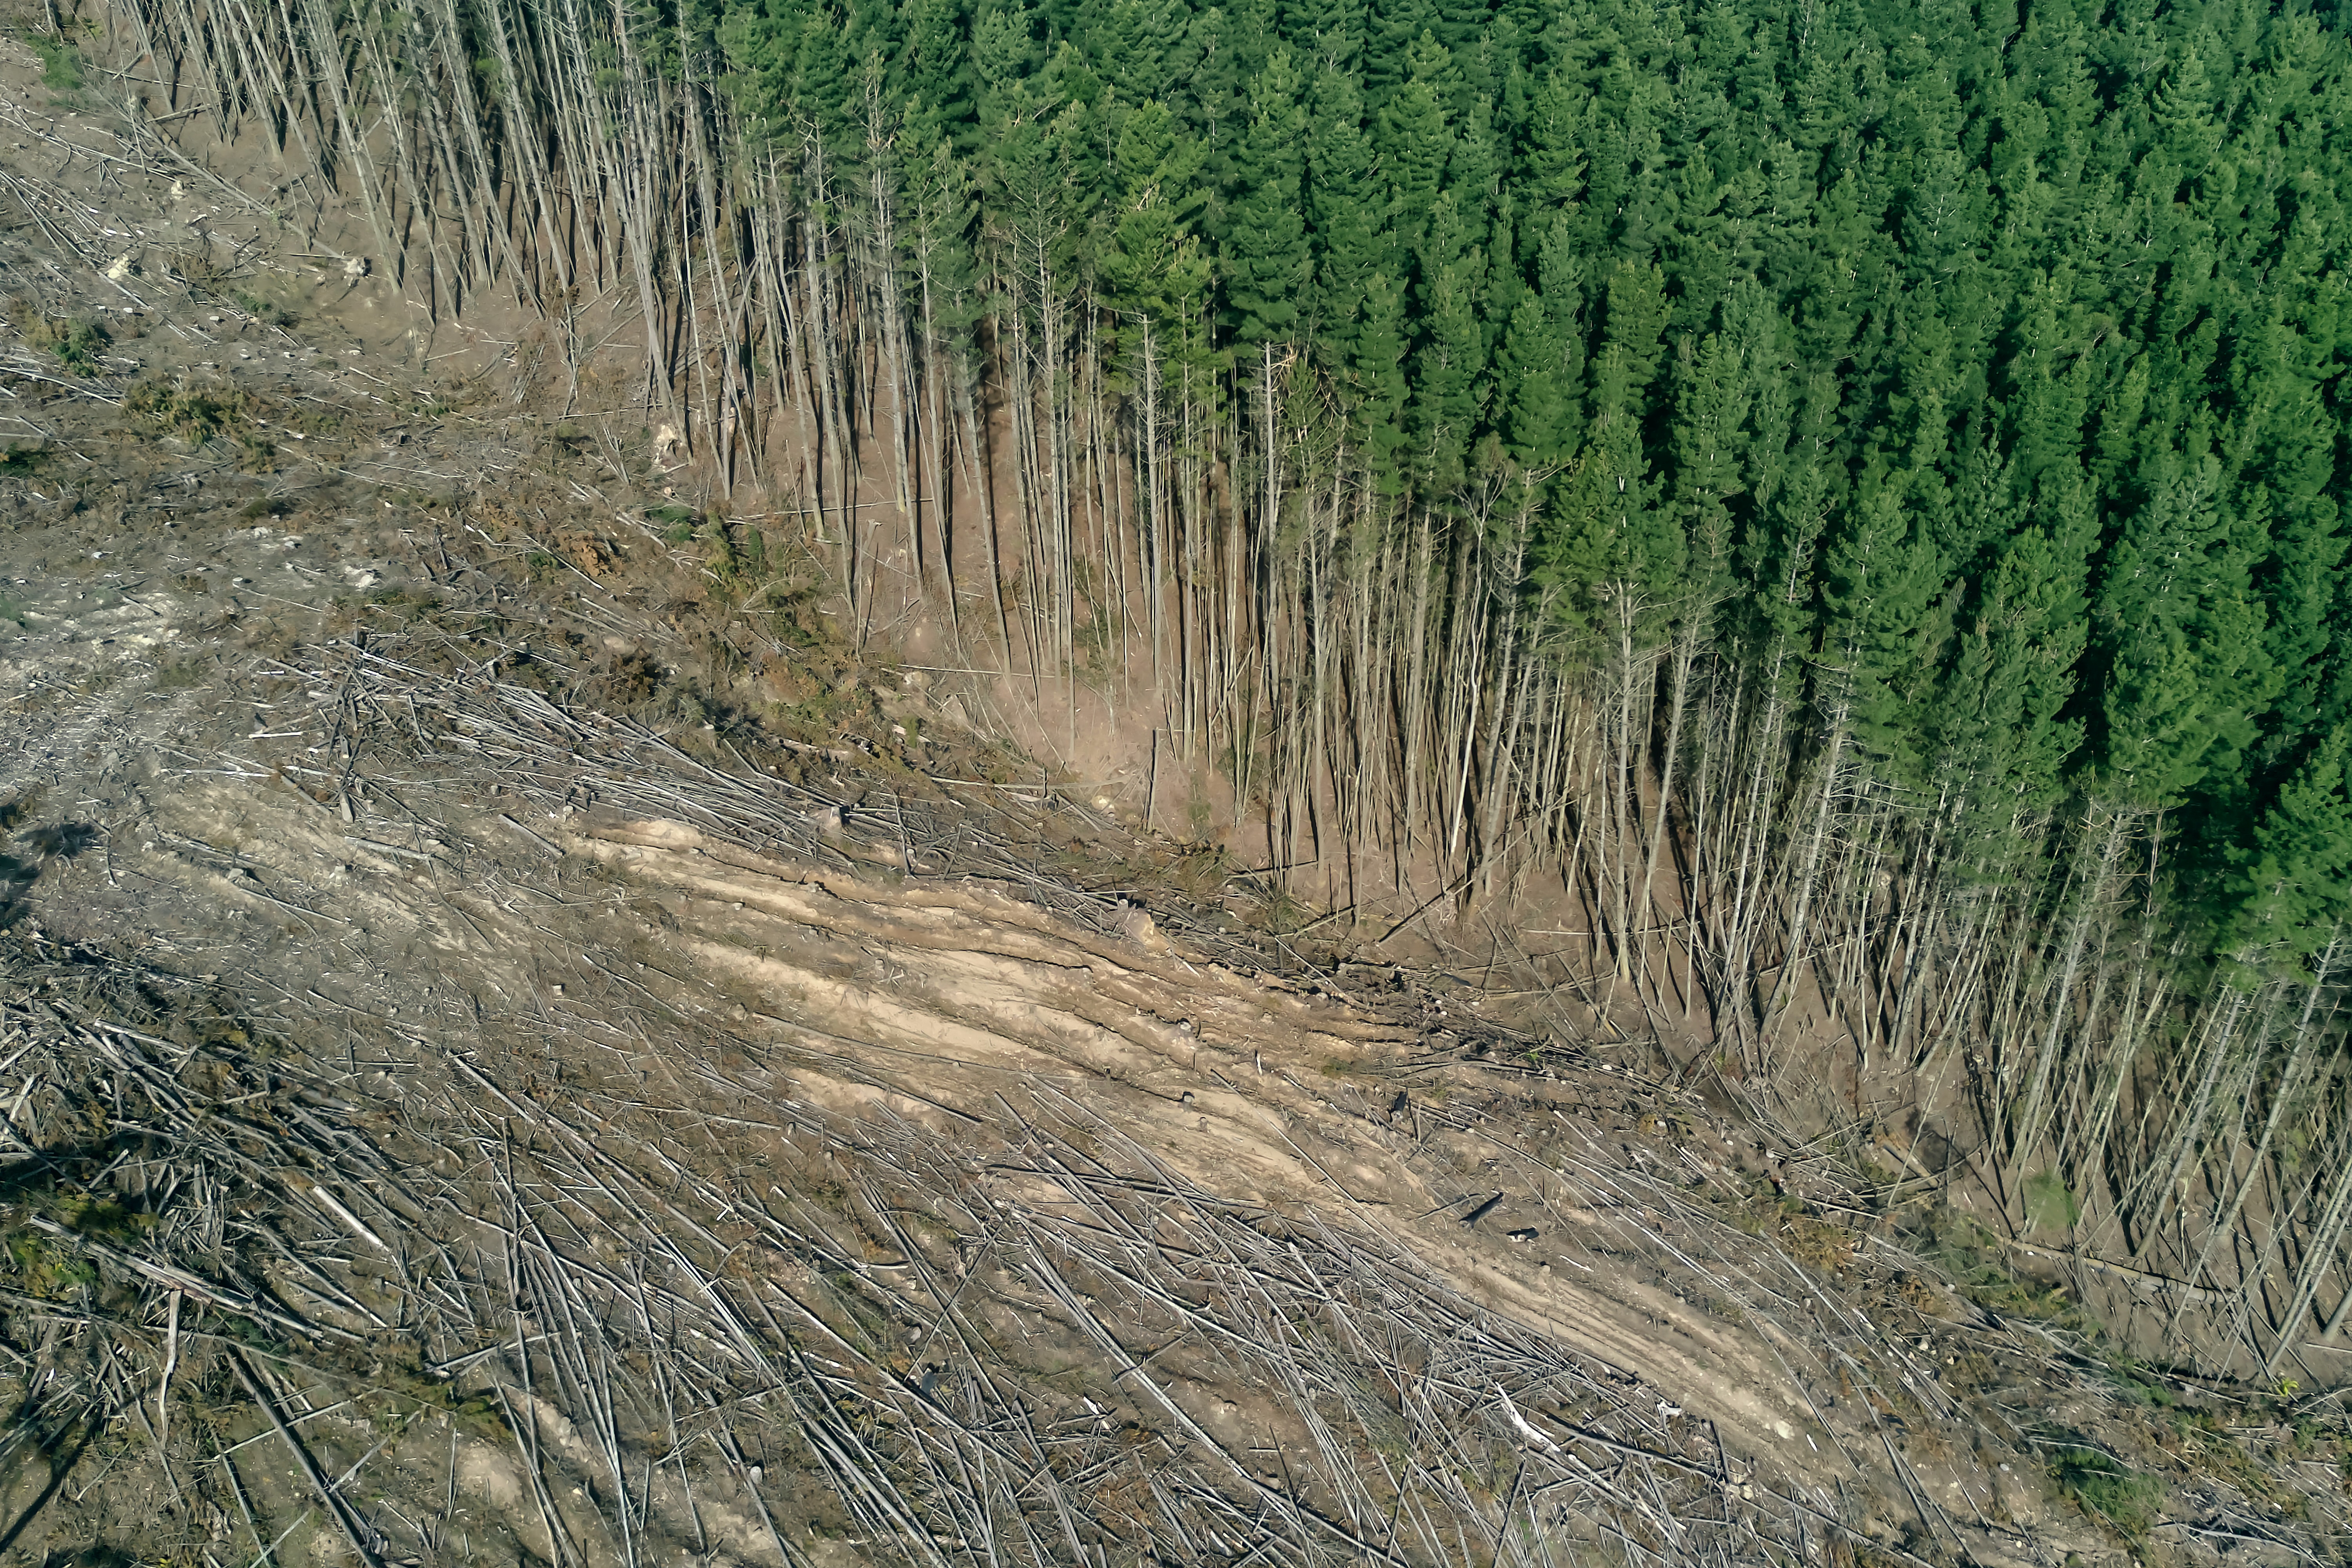 image of trees cut down in forest